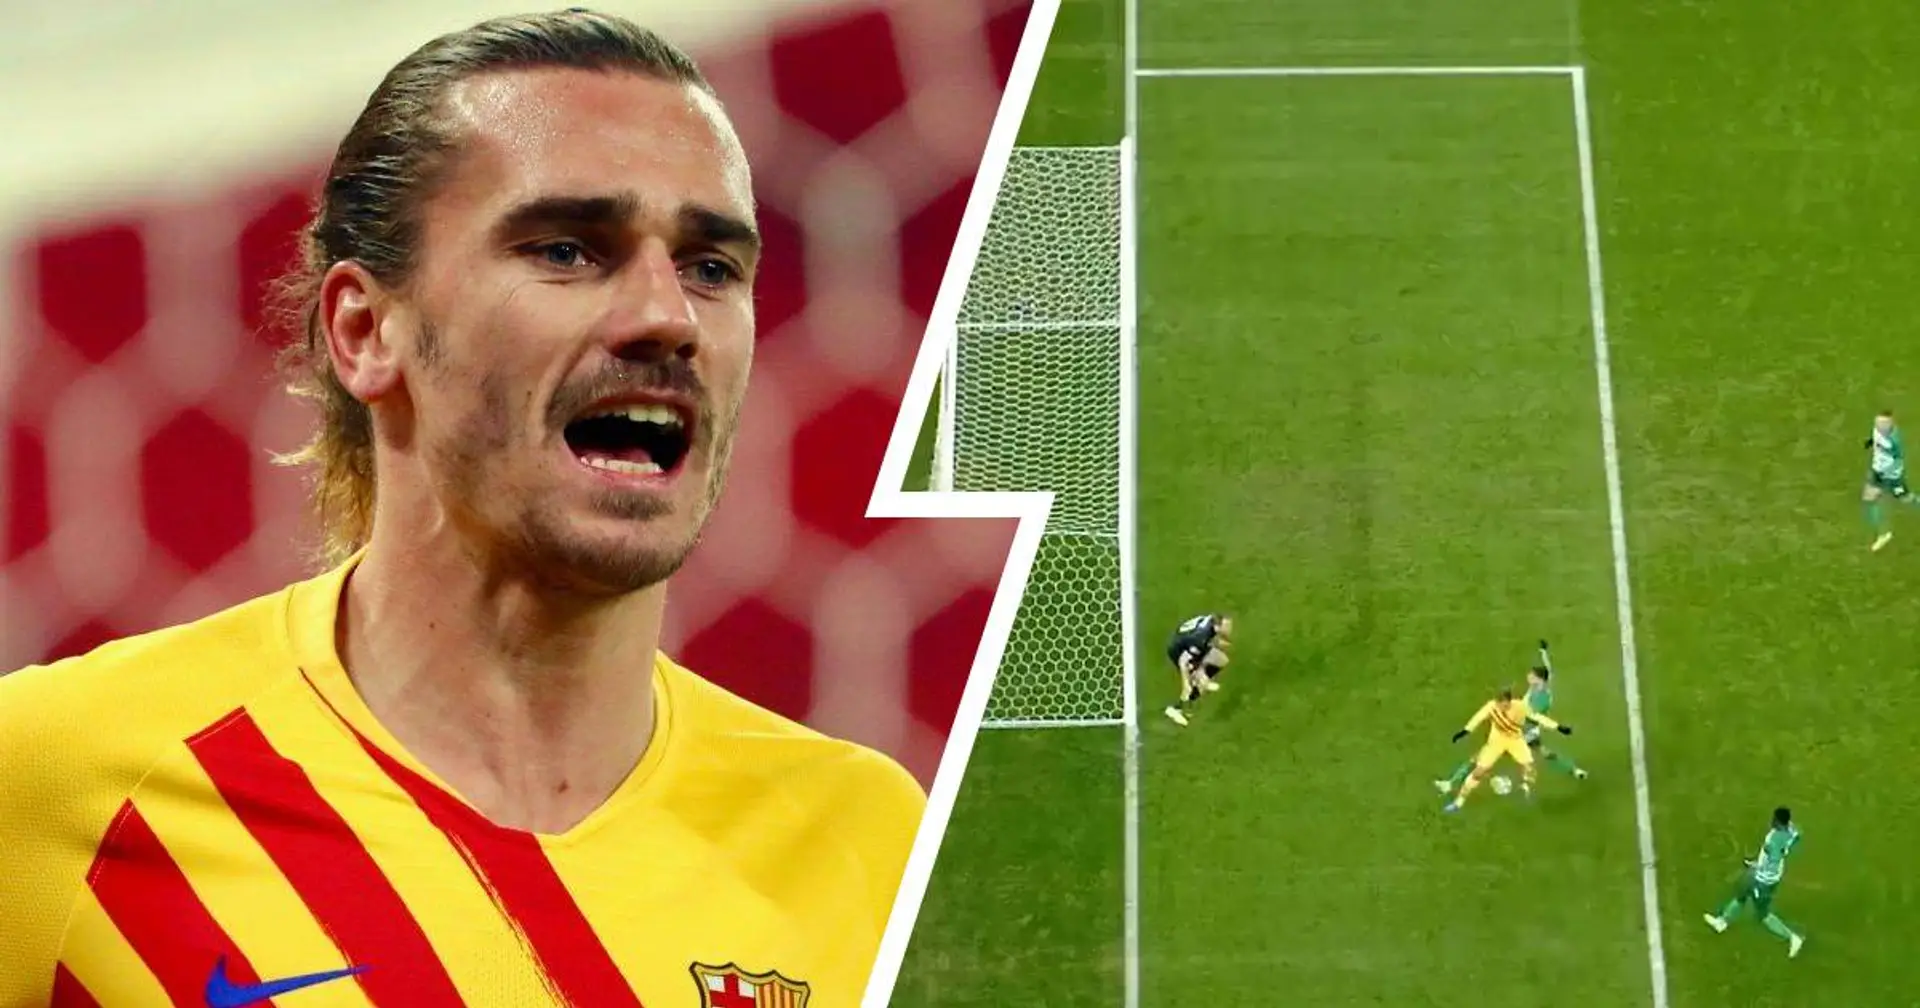 Griezmann's backheel beauty against Ferencvaros named Champions League goal of the week (video)